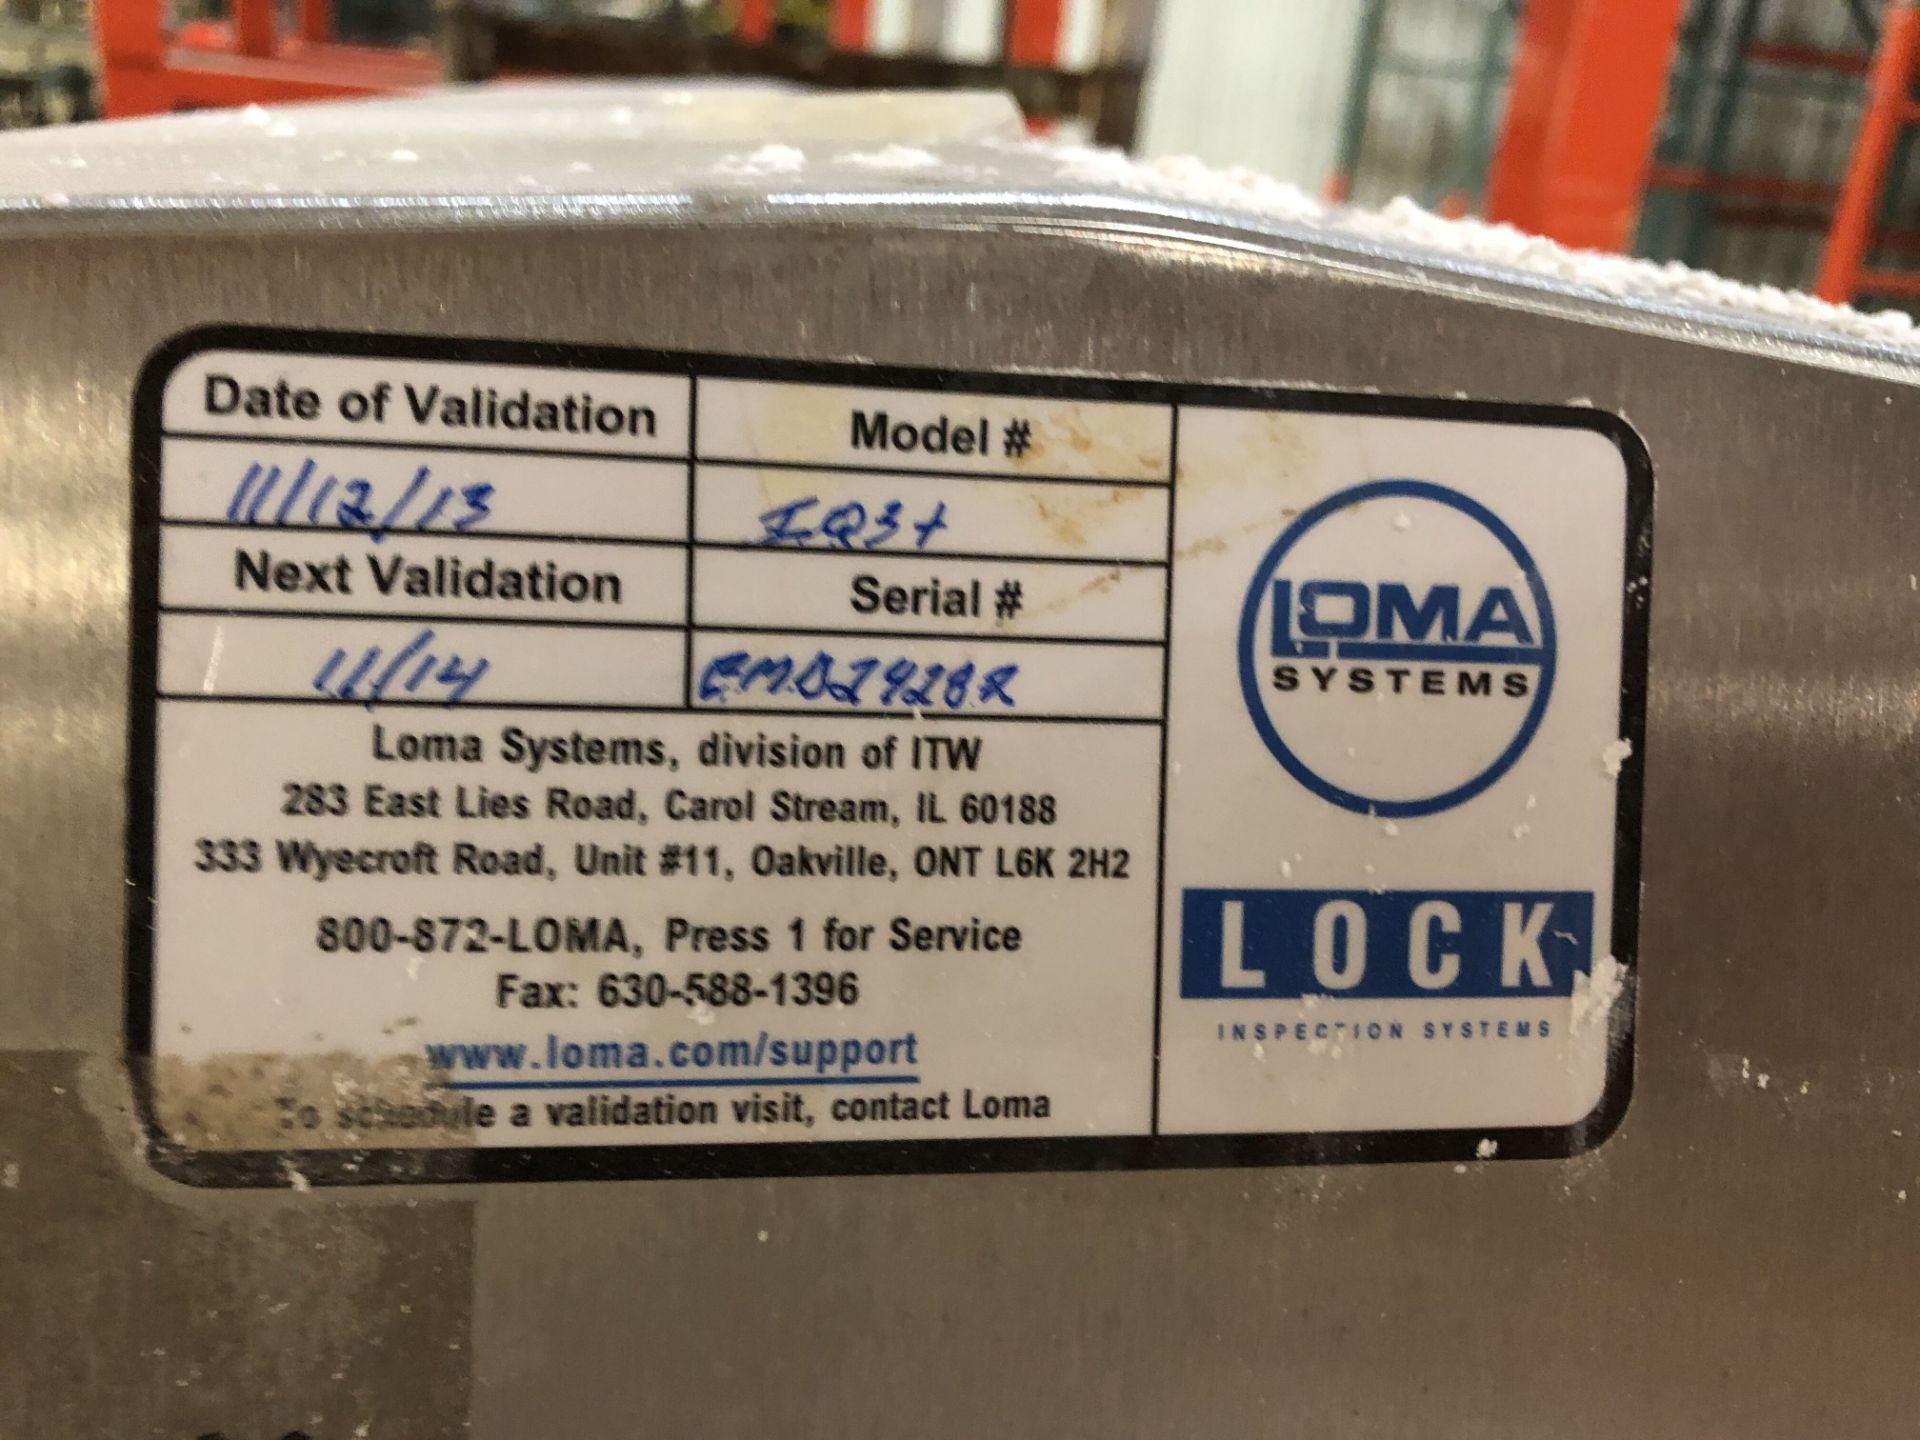 Loma Systems Metal Detector, Rigging Price: $100 - Image 4 of 5